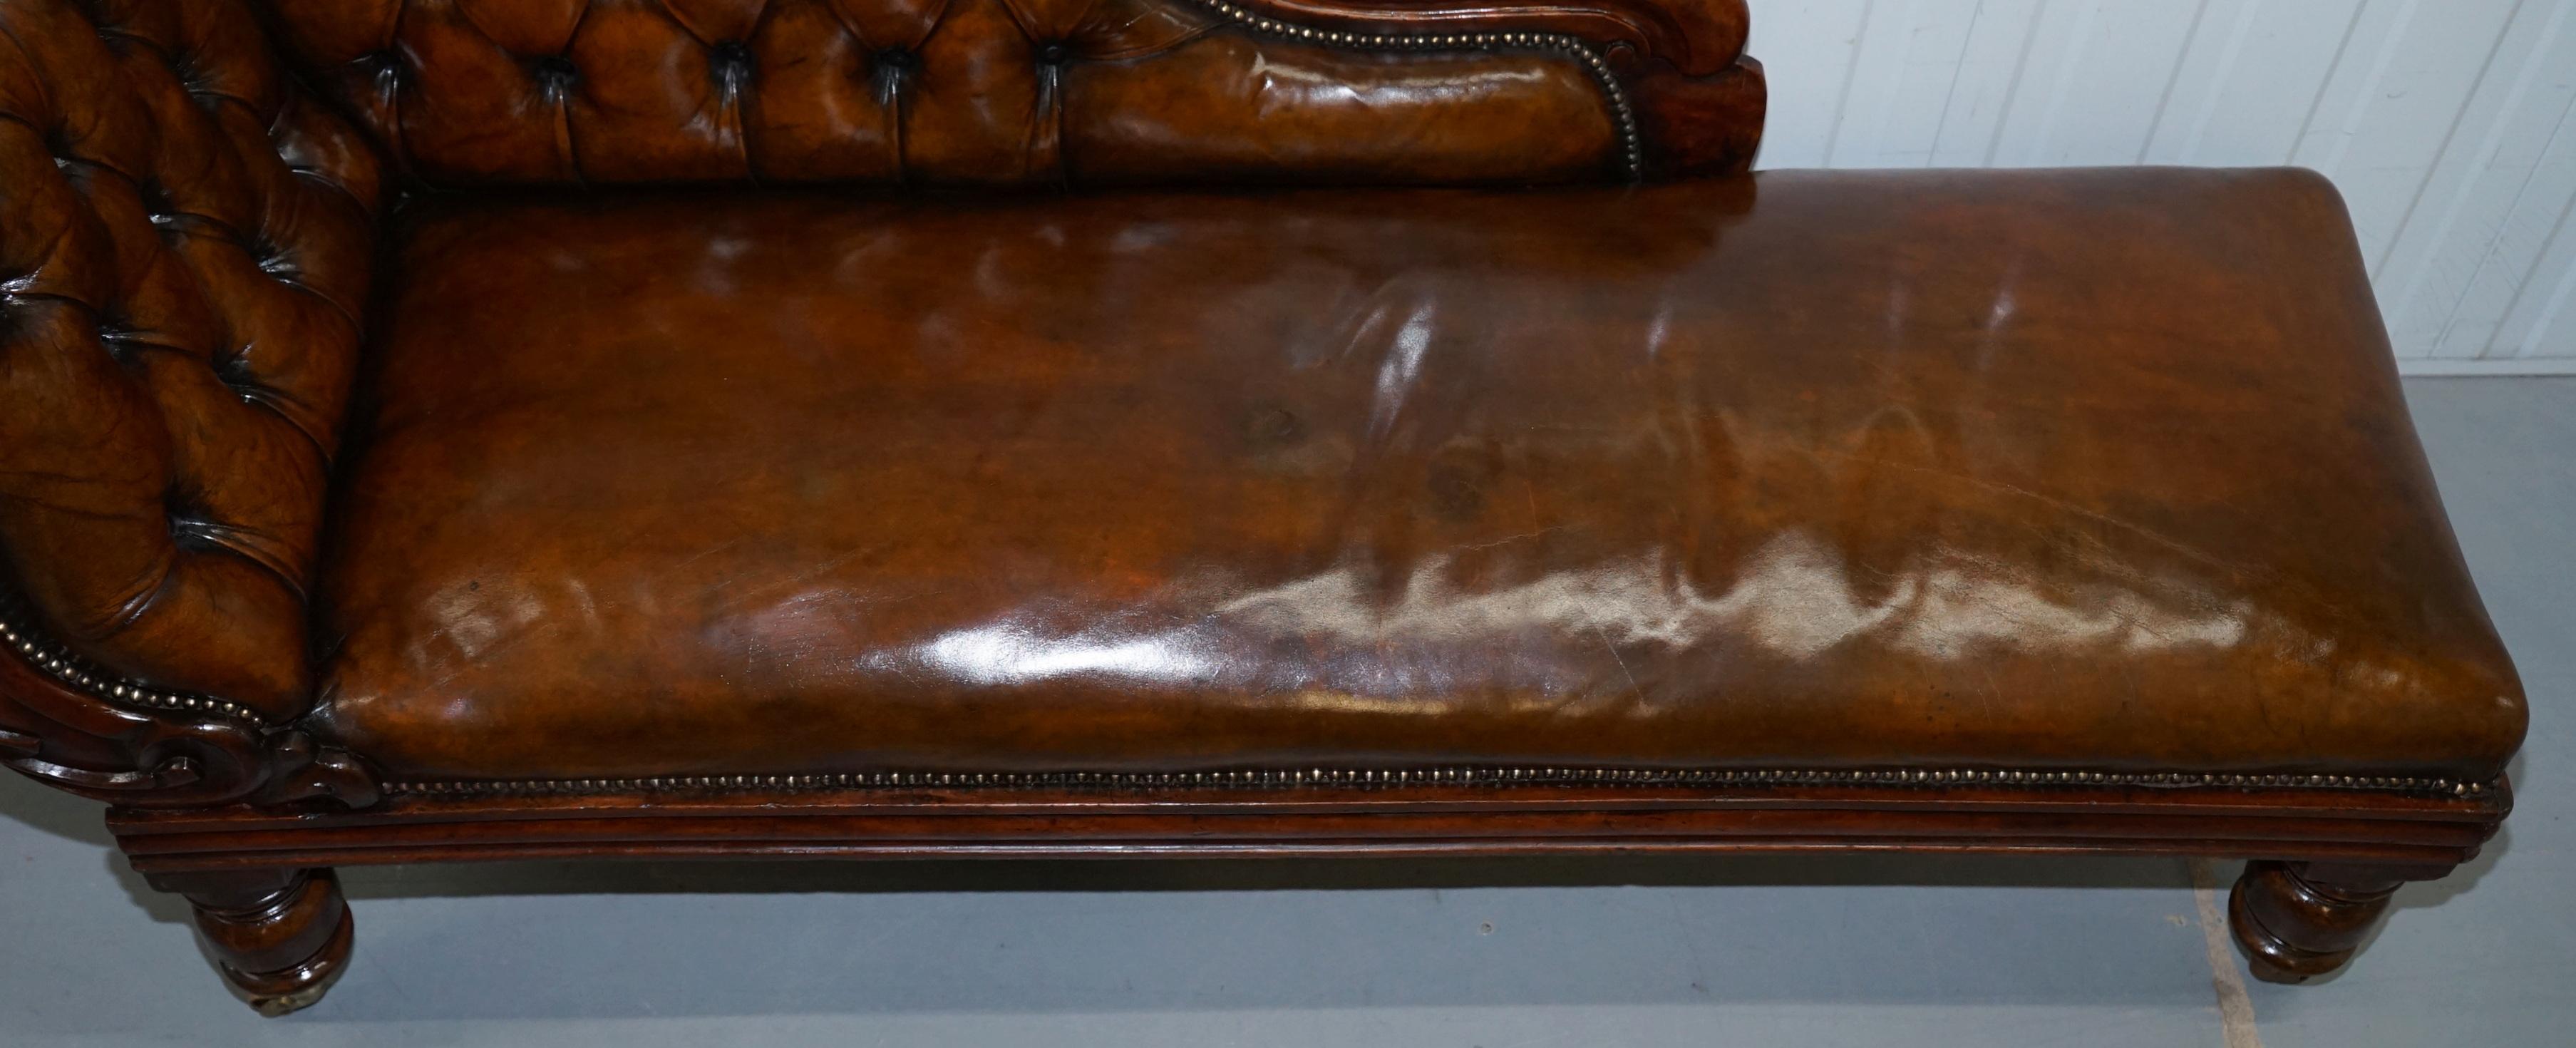 Stunning Restored Victorian Chesterfield Aged Brown Leather Chaise Longue Daybed 4